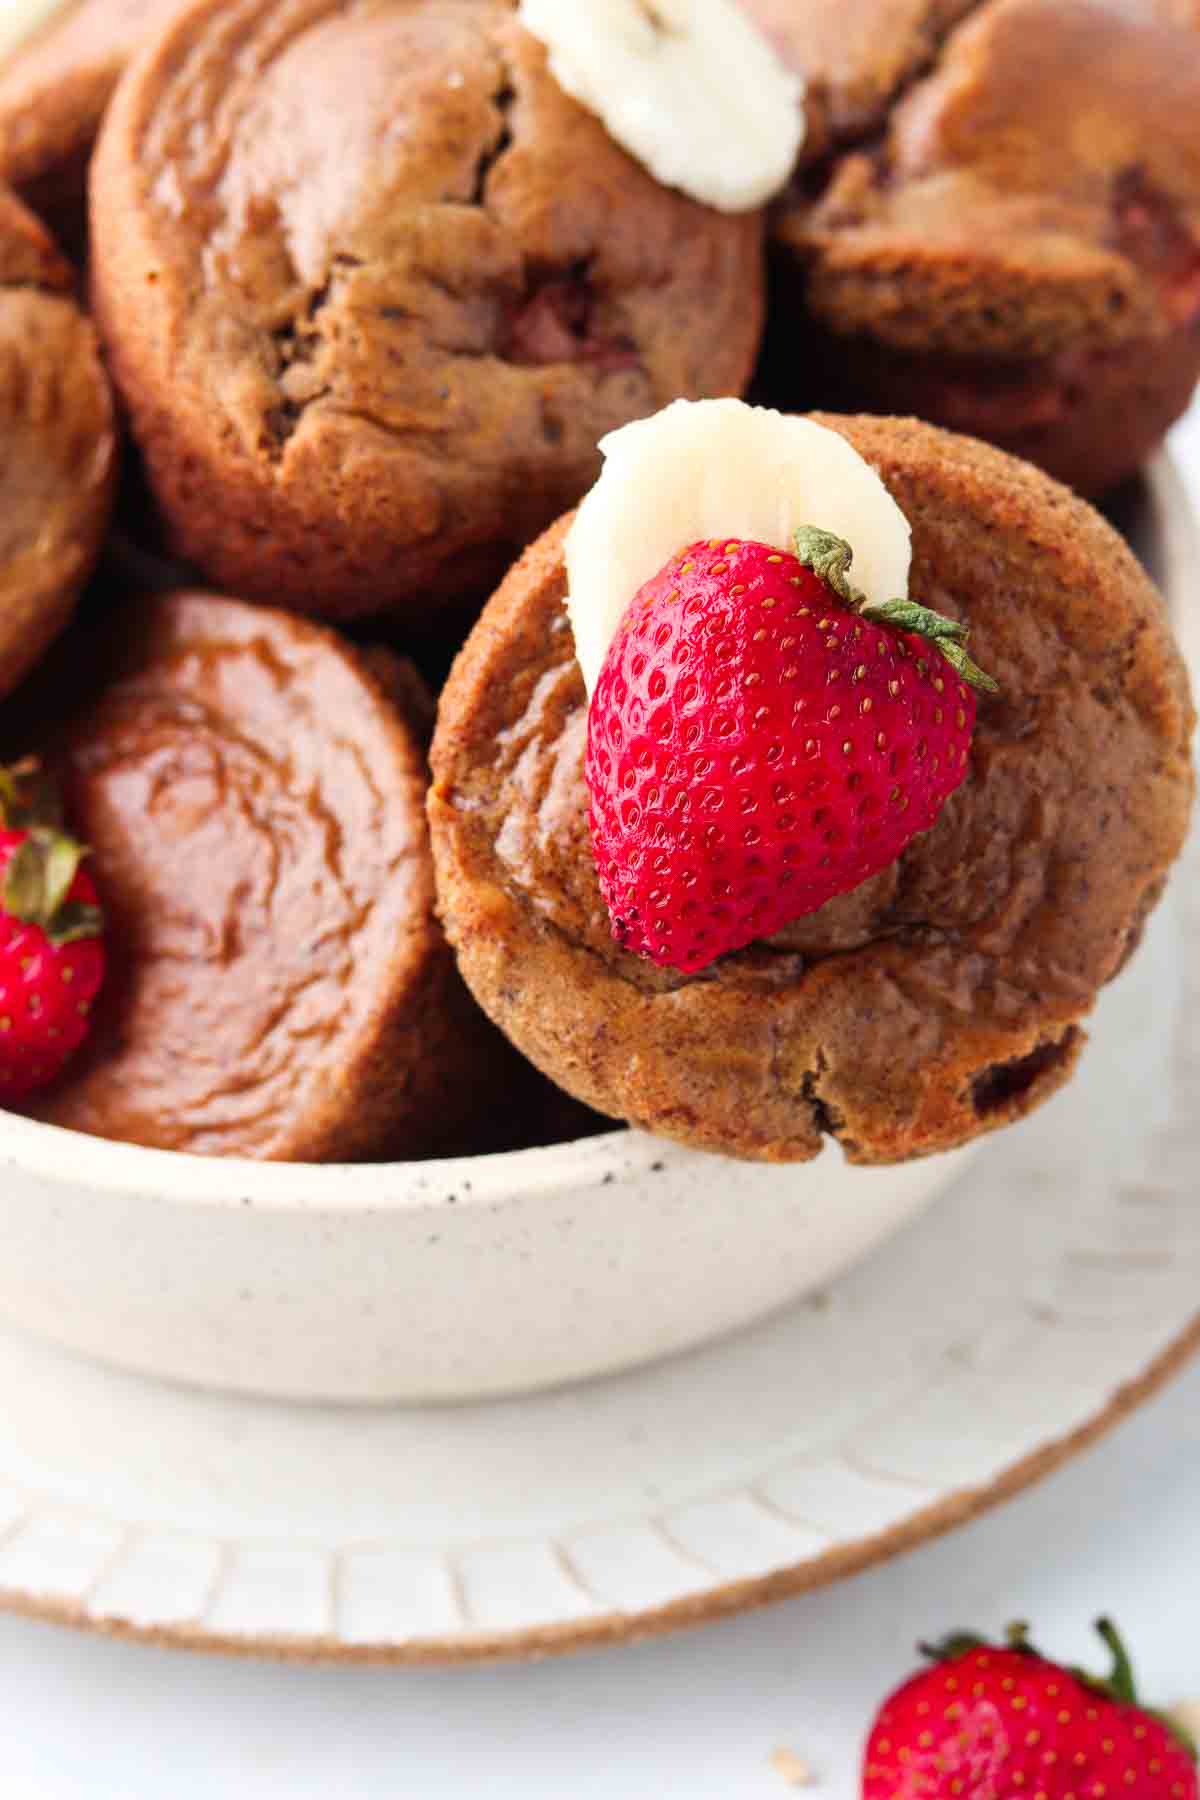 Strawberry muffins garnished with banana slices and fresh strawberries.